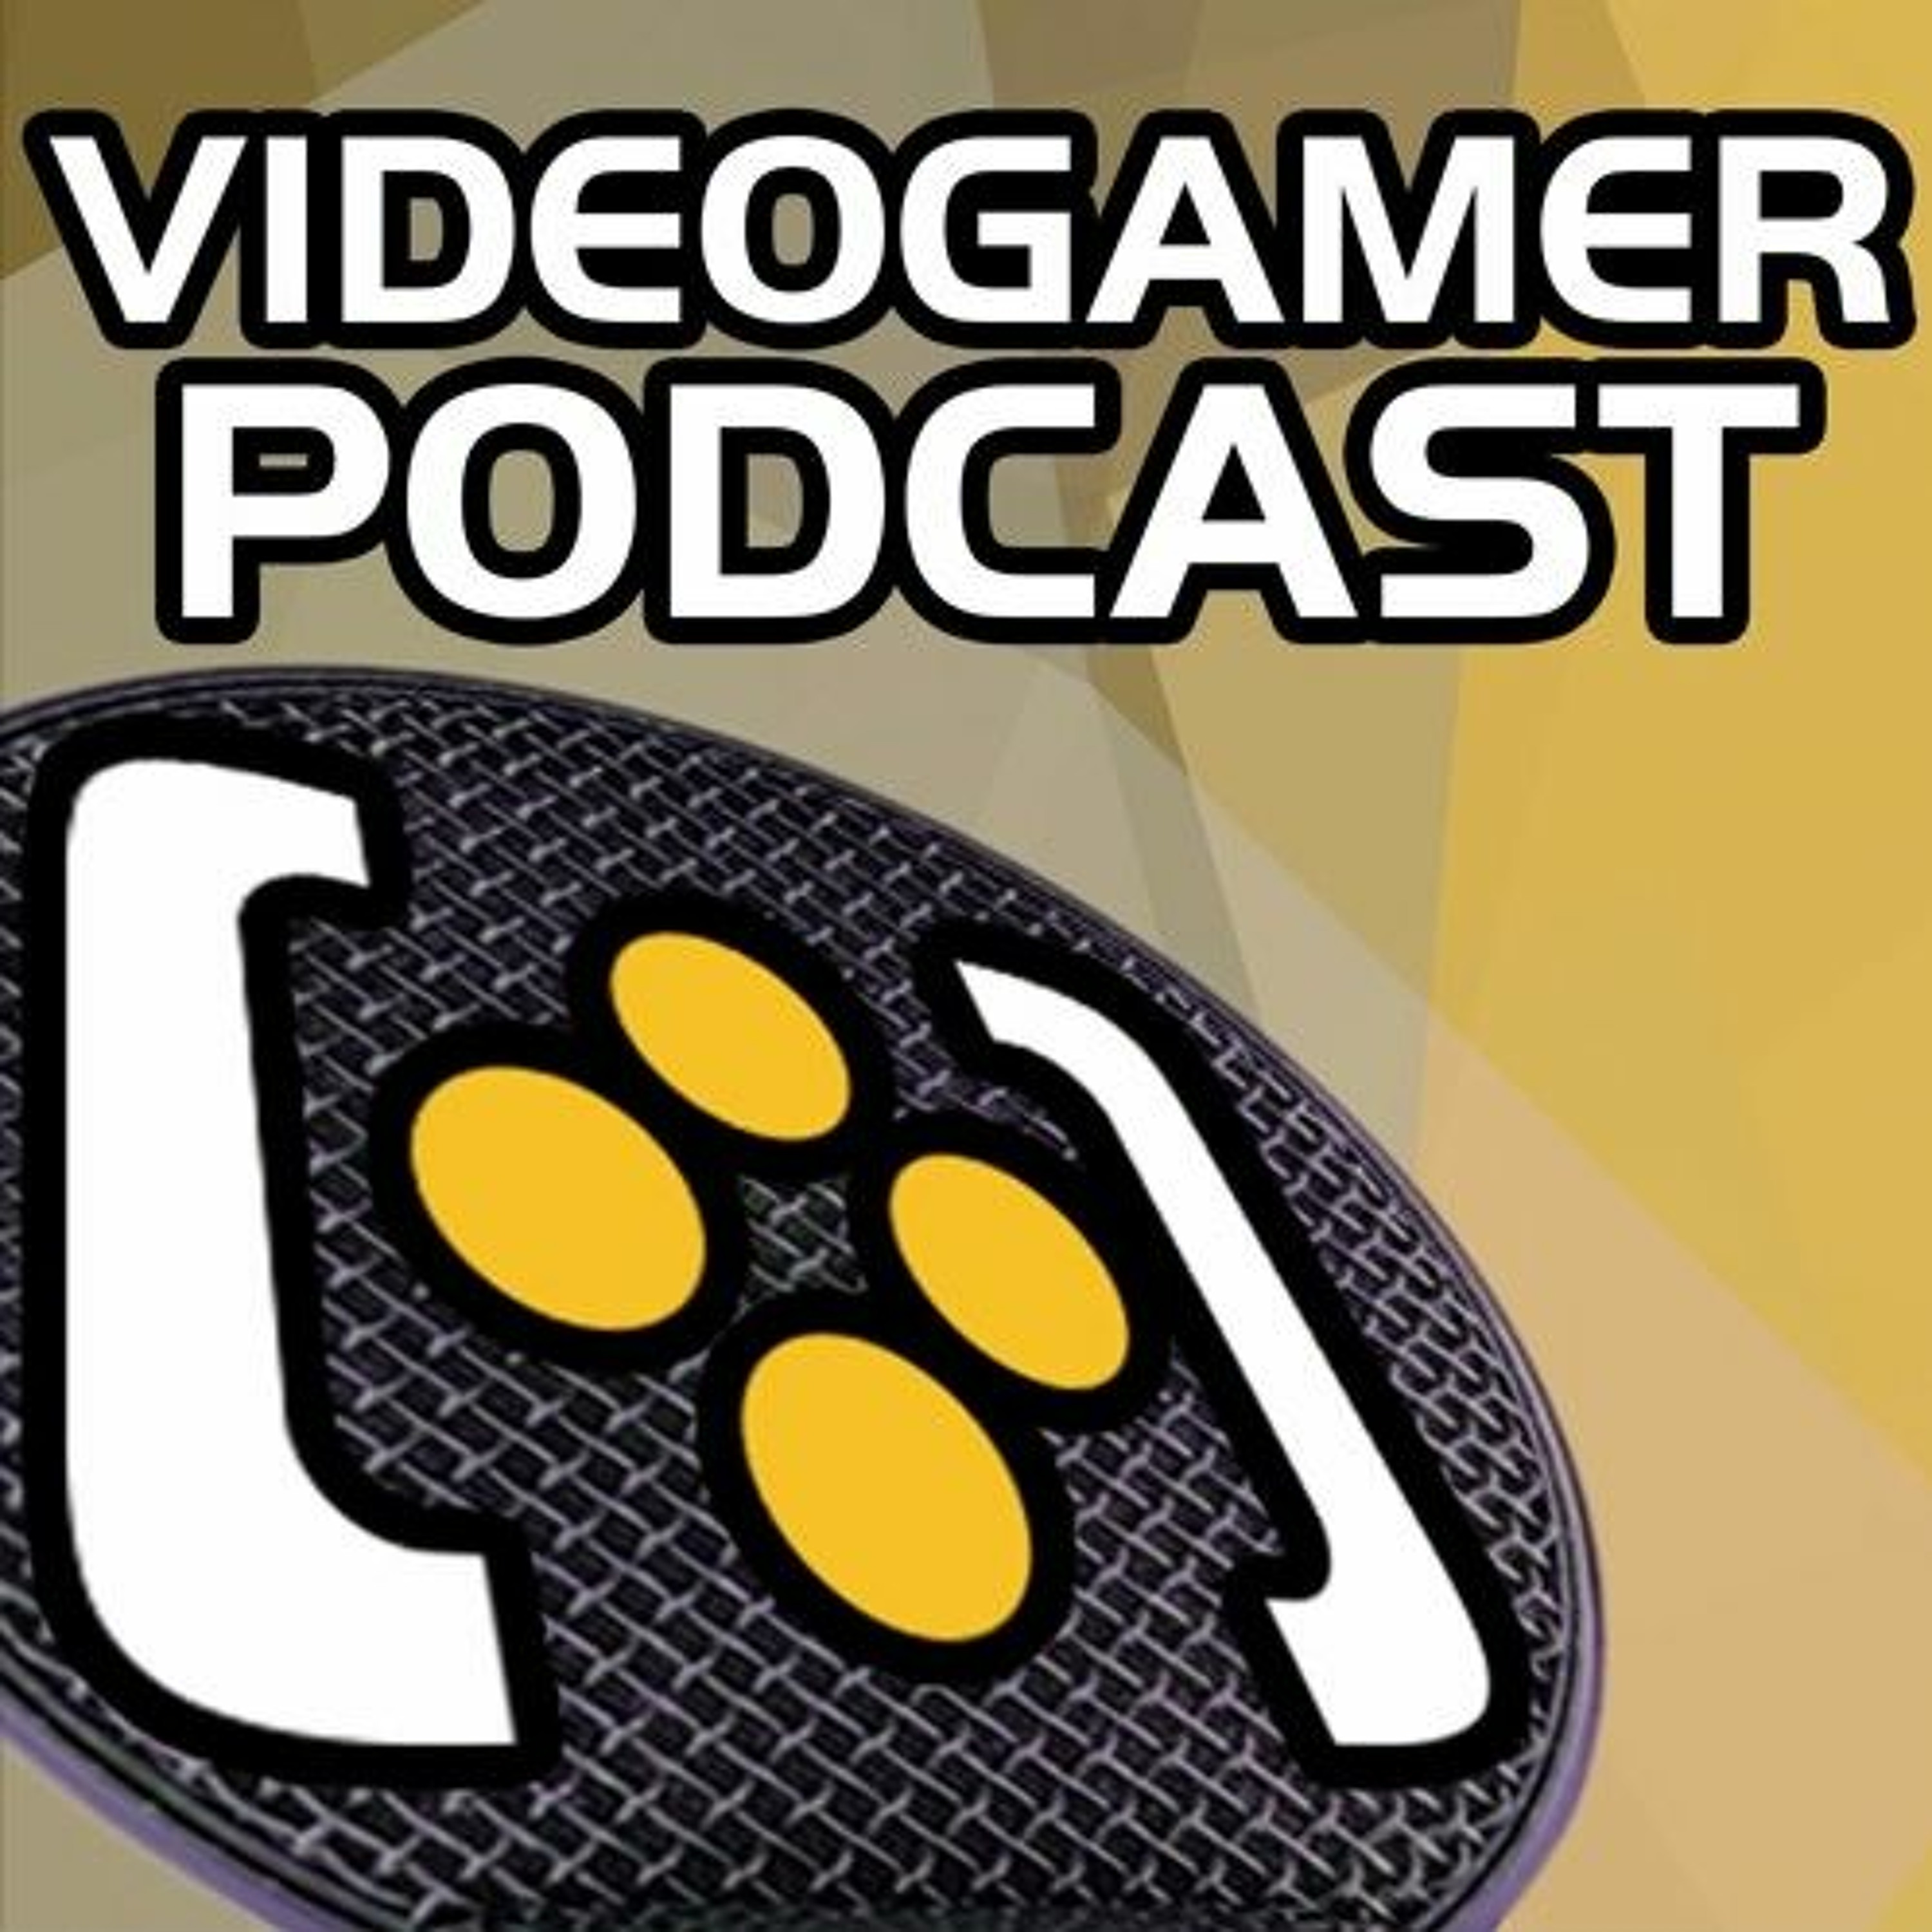 VideoGamer Podcast #494: Gears, Sparks, and Leaks